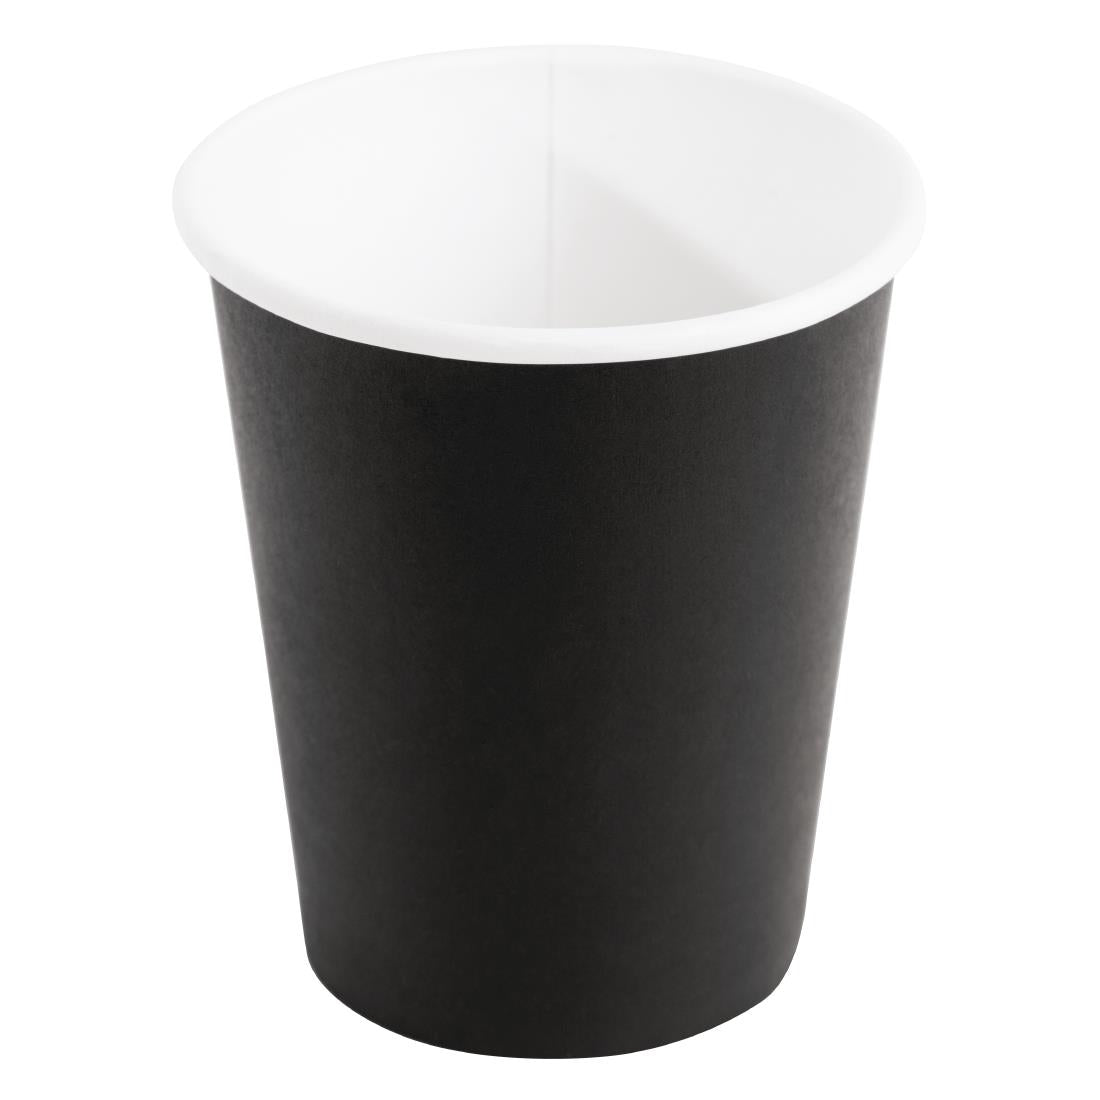 GF041 Fiesta Recyclable Coffee Cups Single Wall Black 225ml / 8oz (Pack of 50) JD Catering Equipment Solutions Ltd